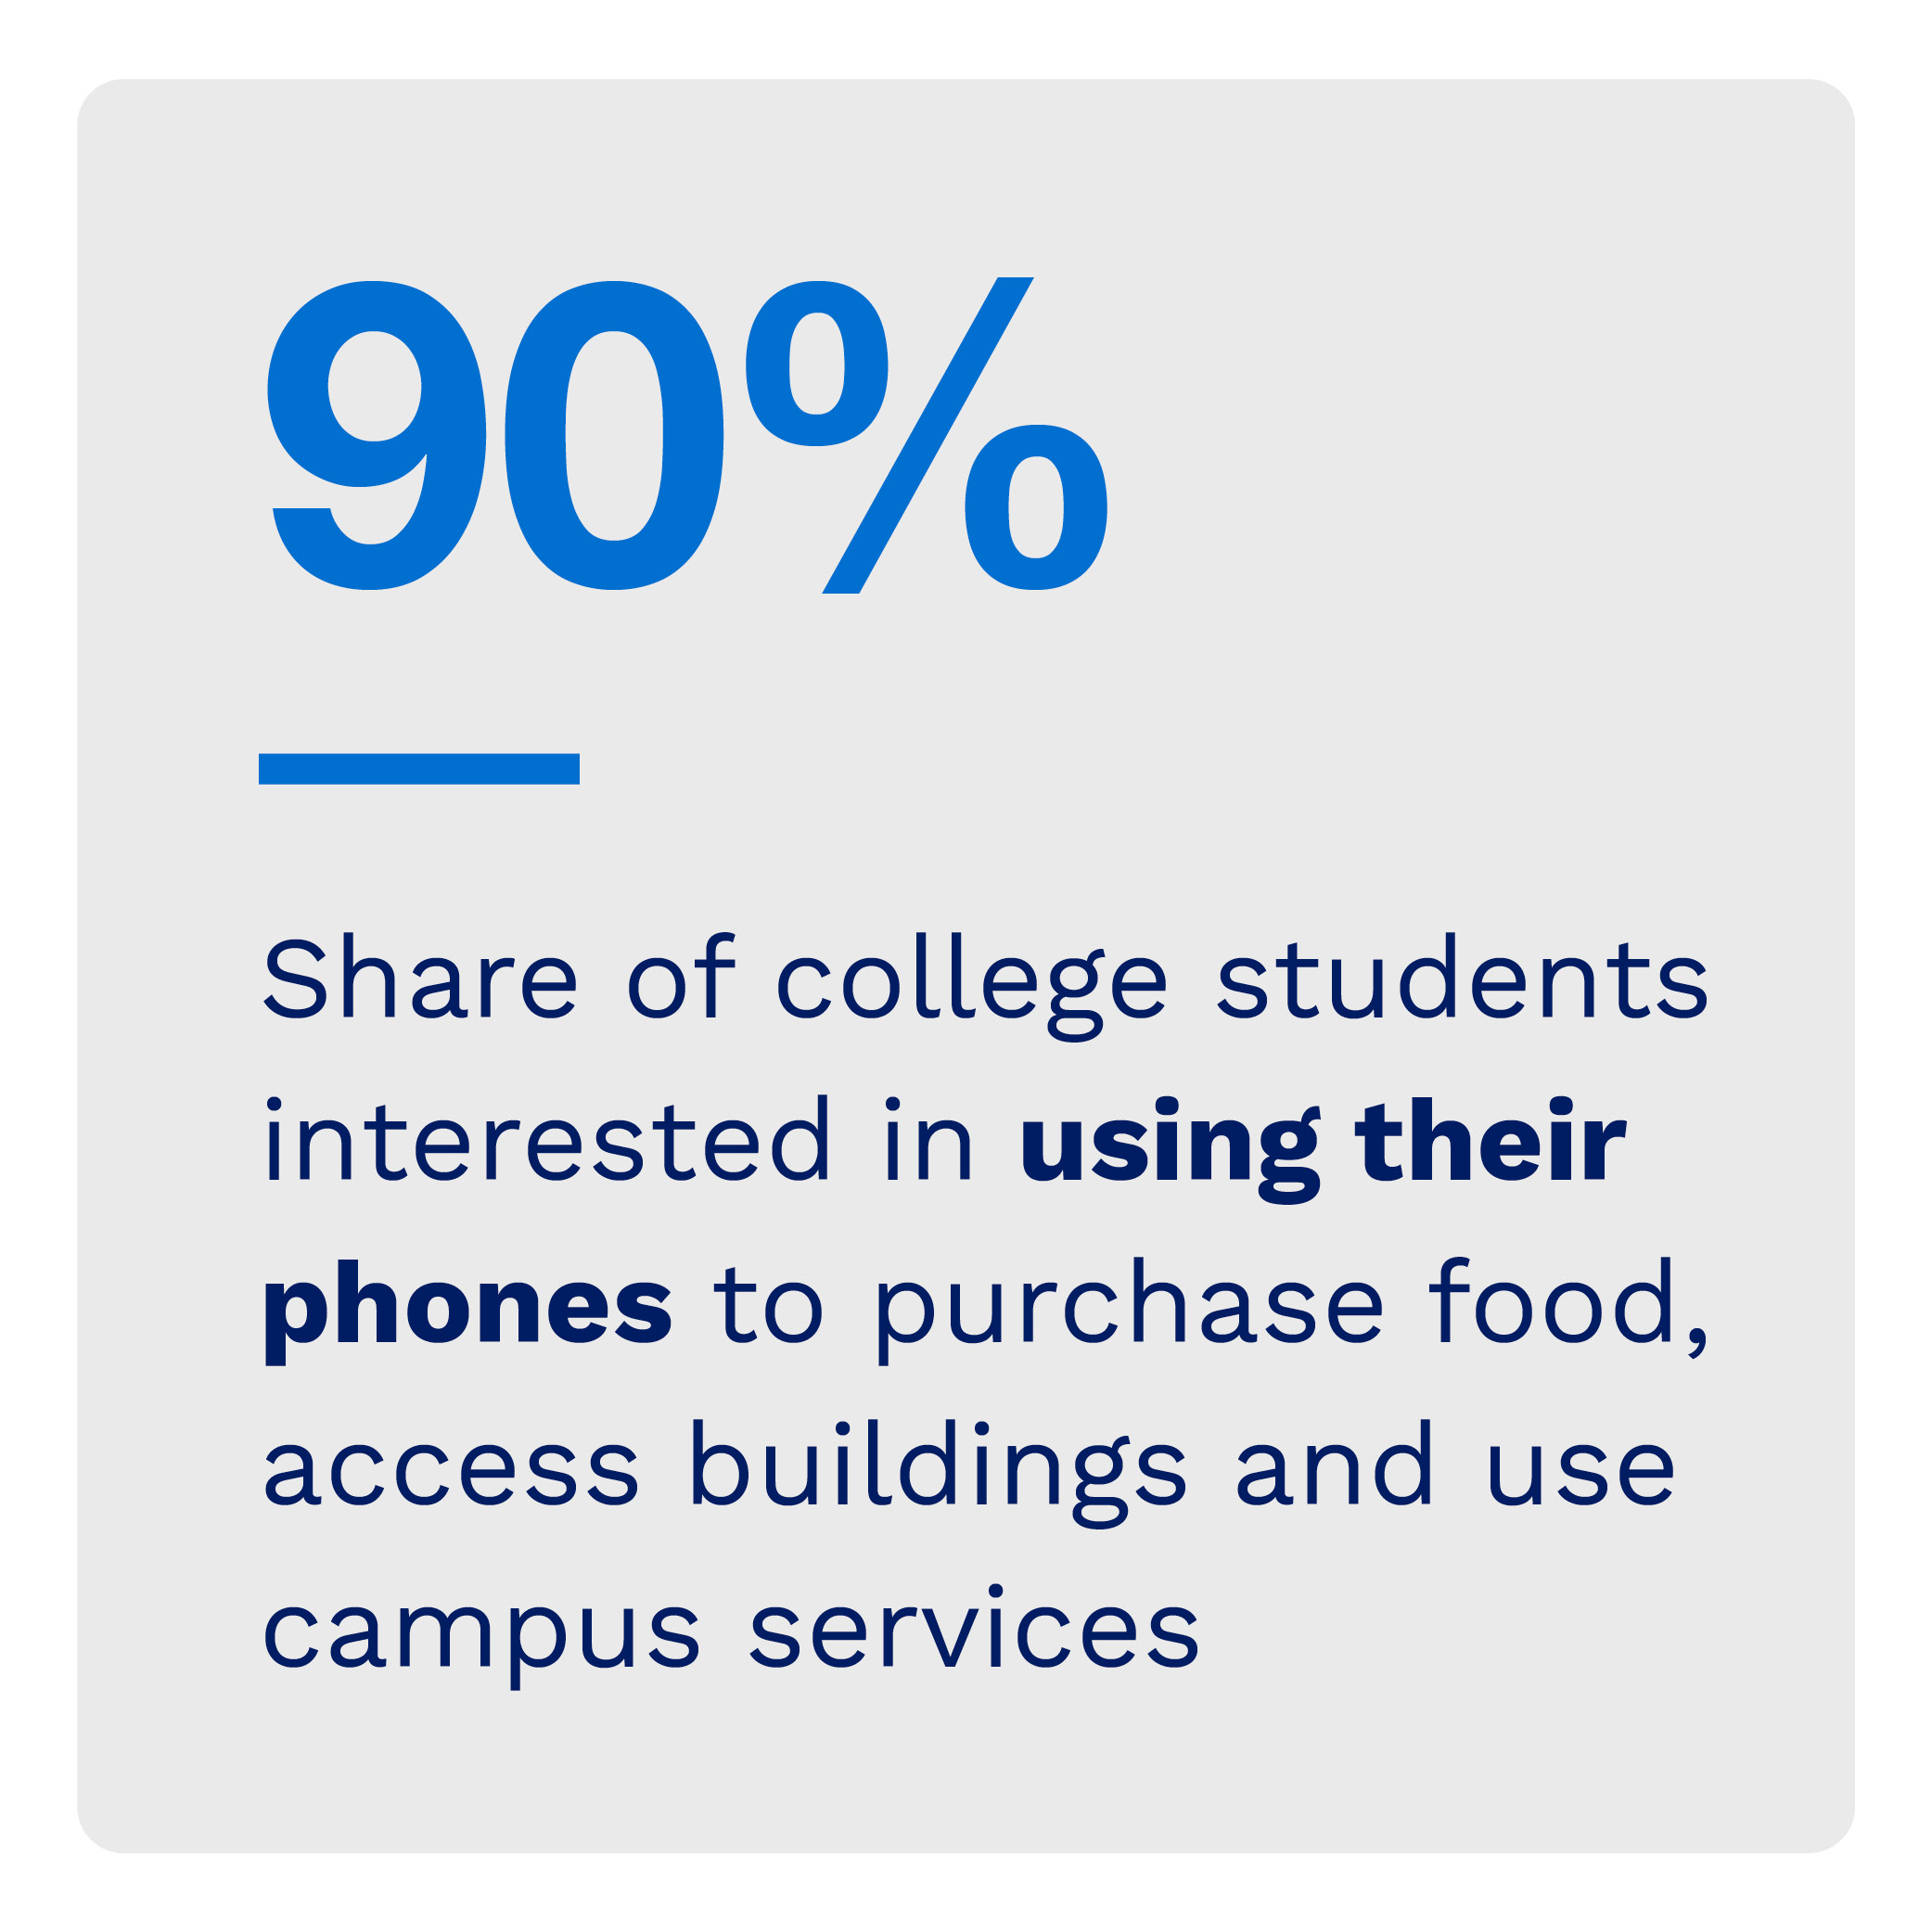 90%: Share of college students interested in using their phones to purchase food, access buildings and use campus services